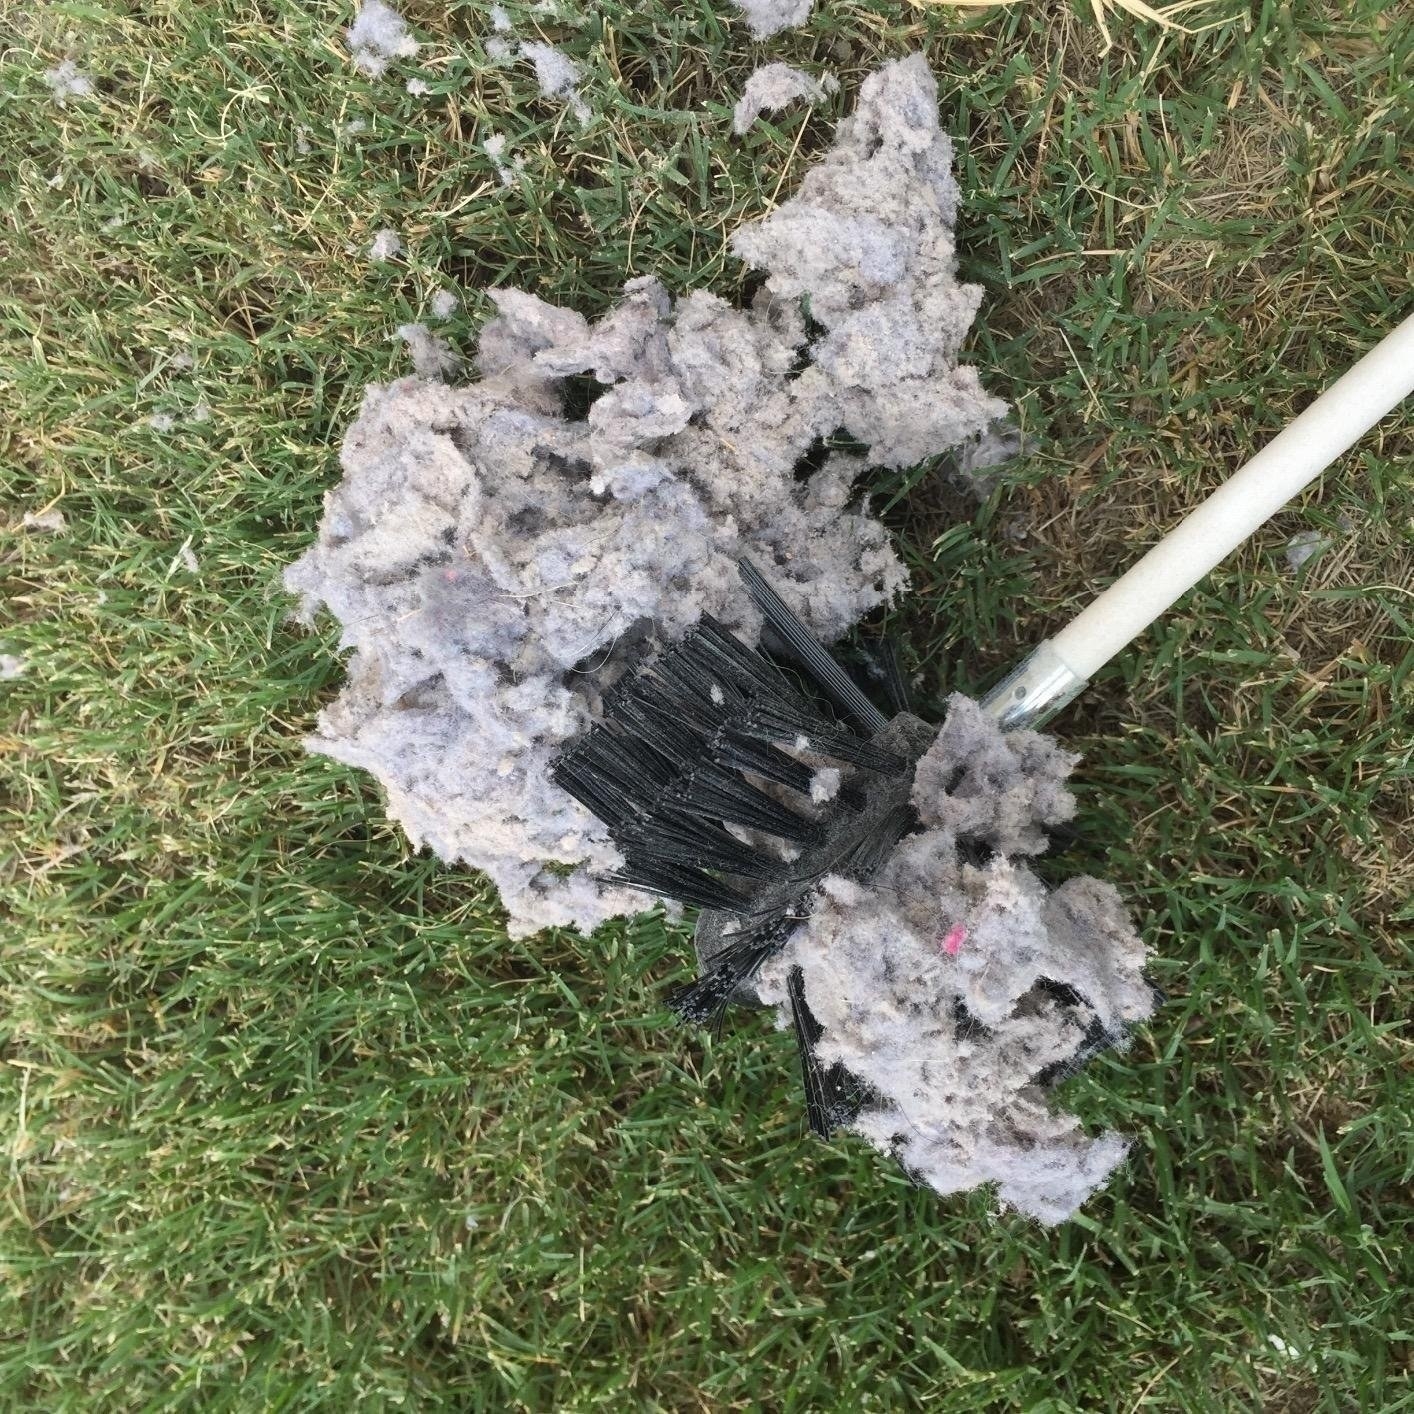 A reader&#x27;s cylindrical brush at the end of the rods, laying in a big pile of lint it cleaned out from their vent